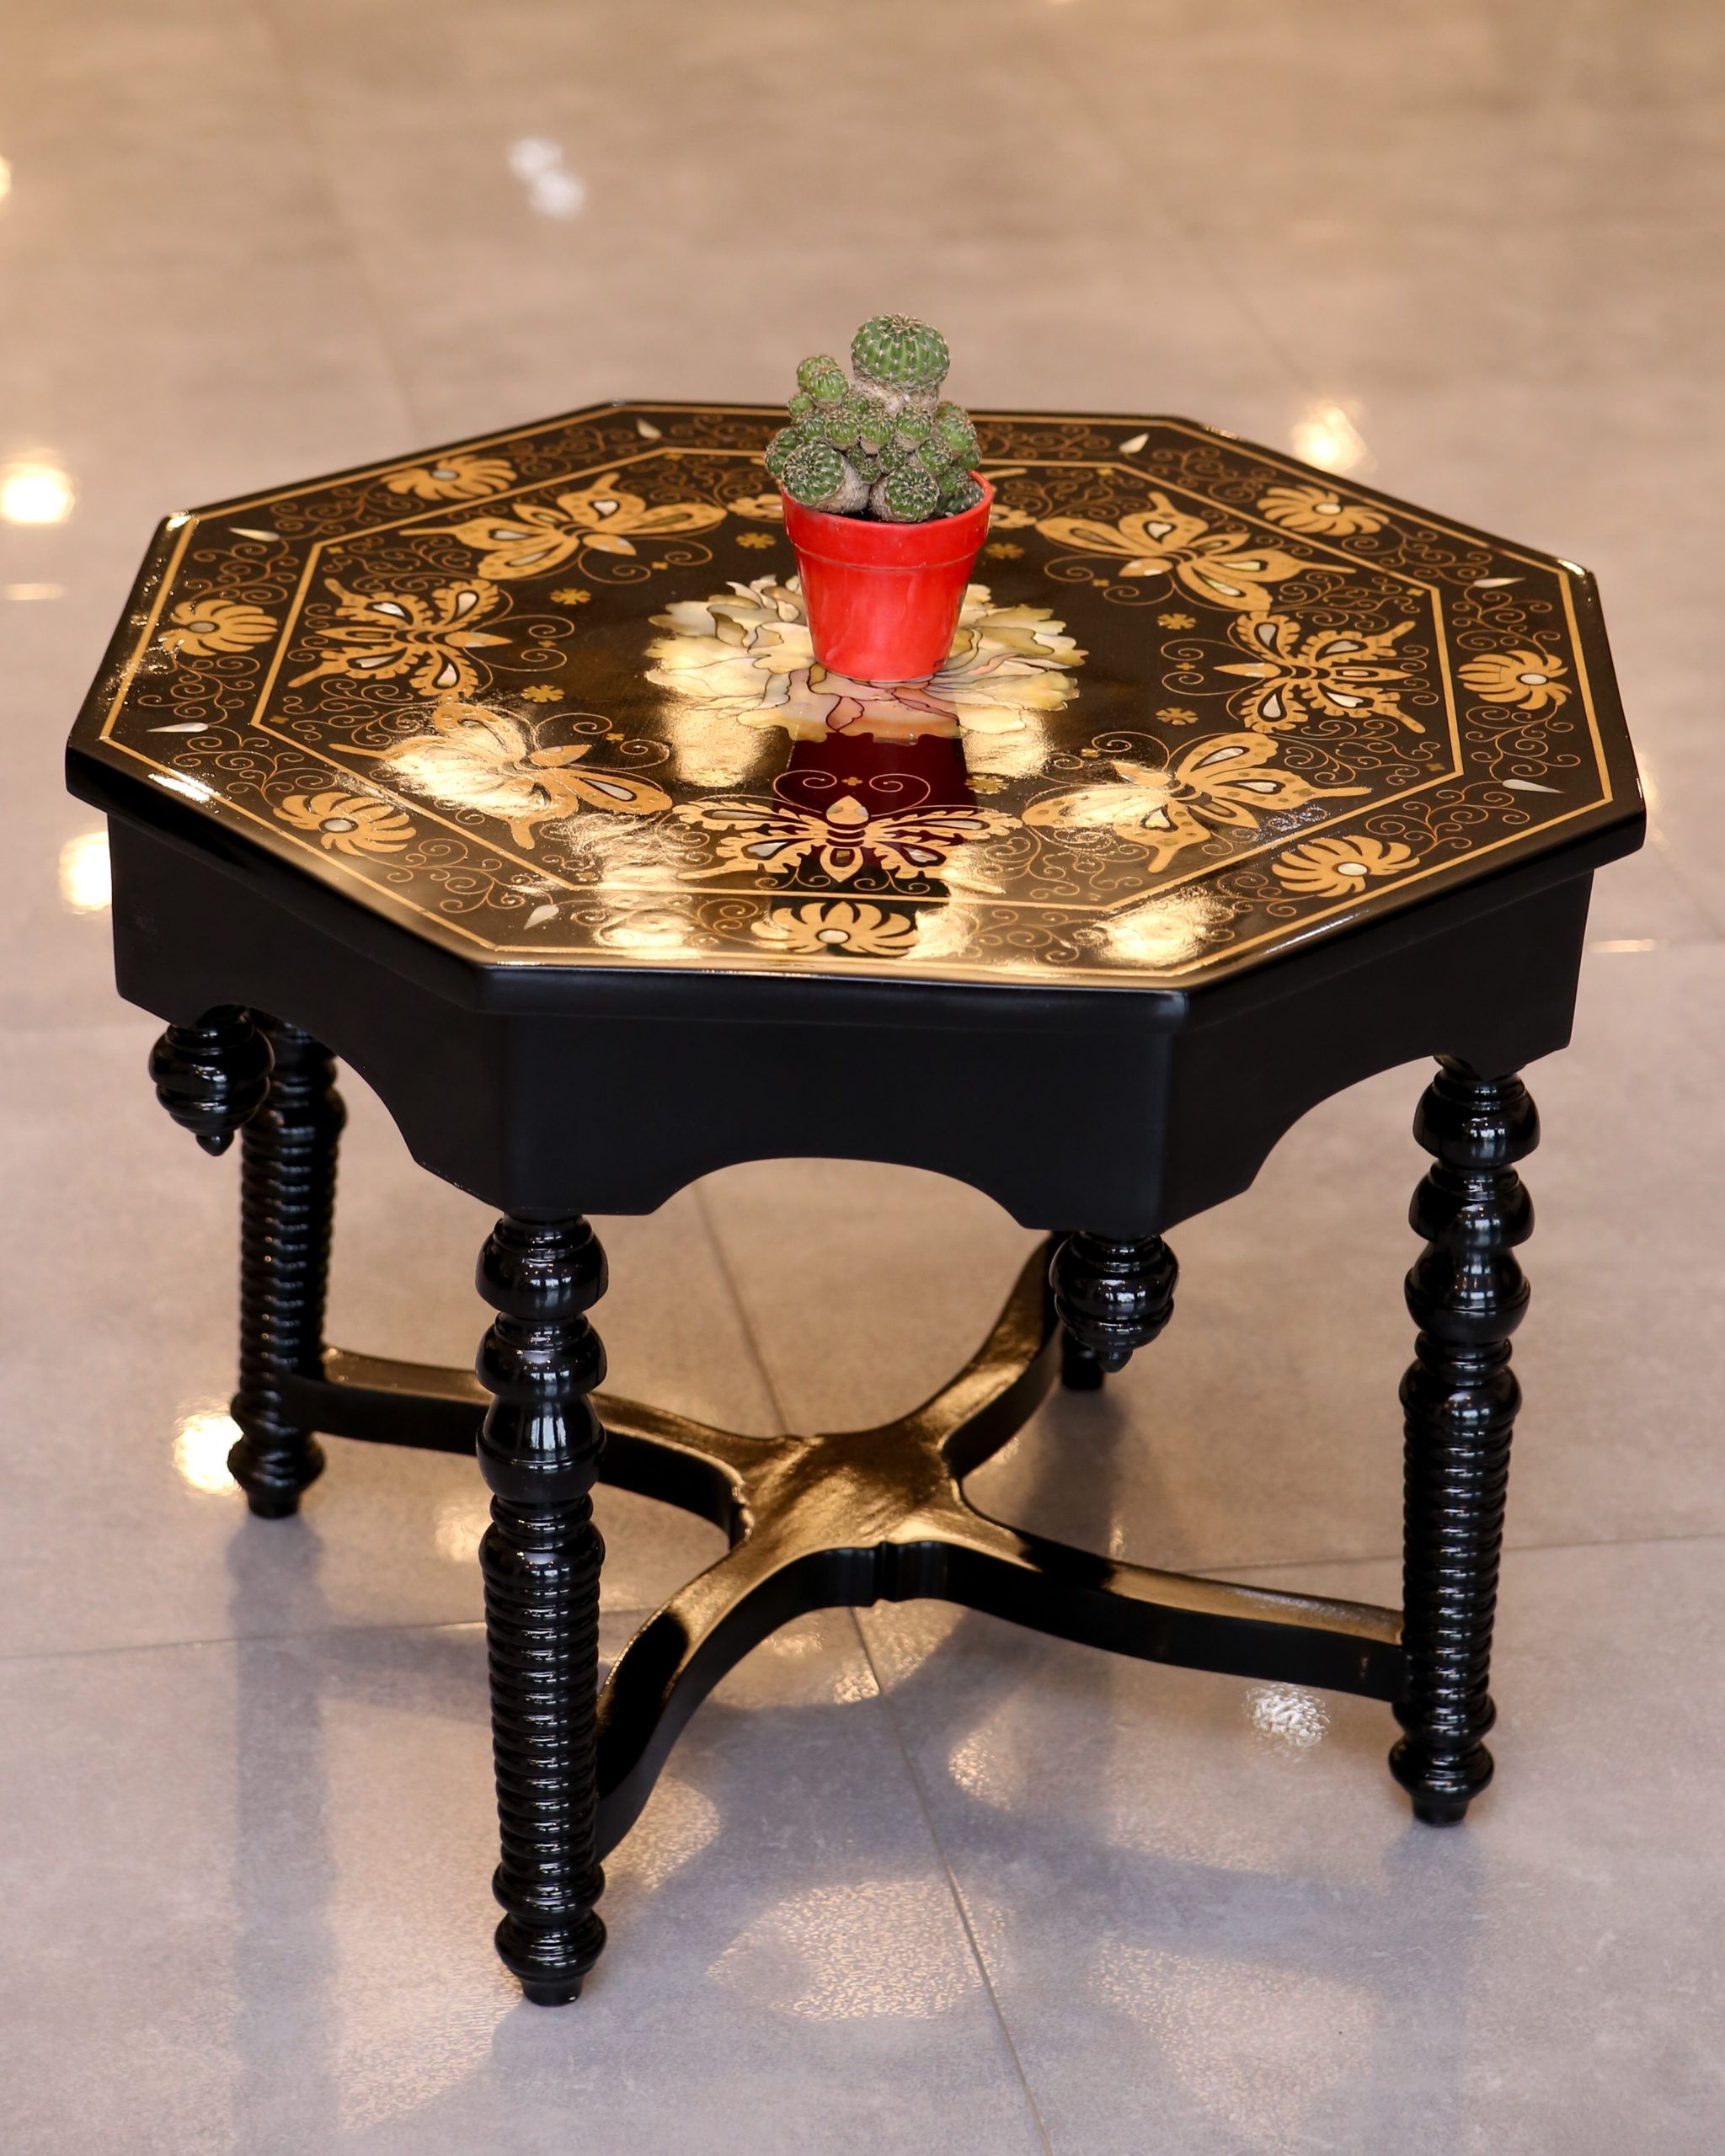 Antique Black And Gold Coffee Table | Az Living Spaces Pertaining To Antique Gold And Glass Coffee Tables (View 4 of 15)